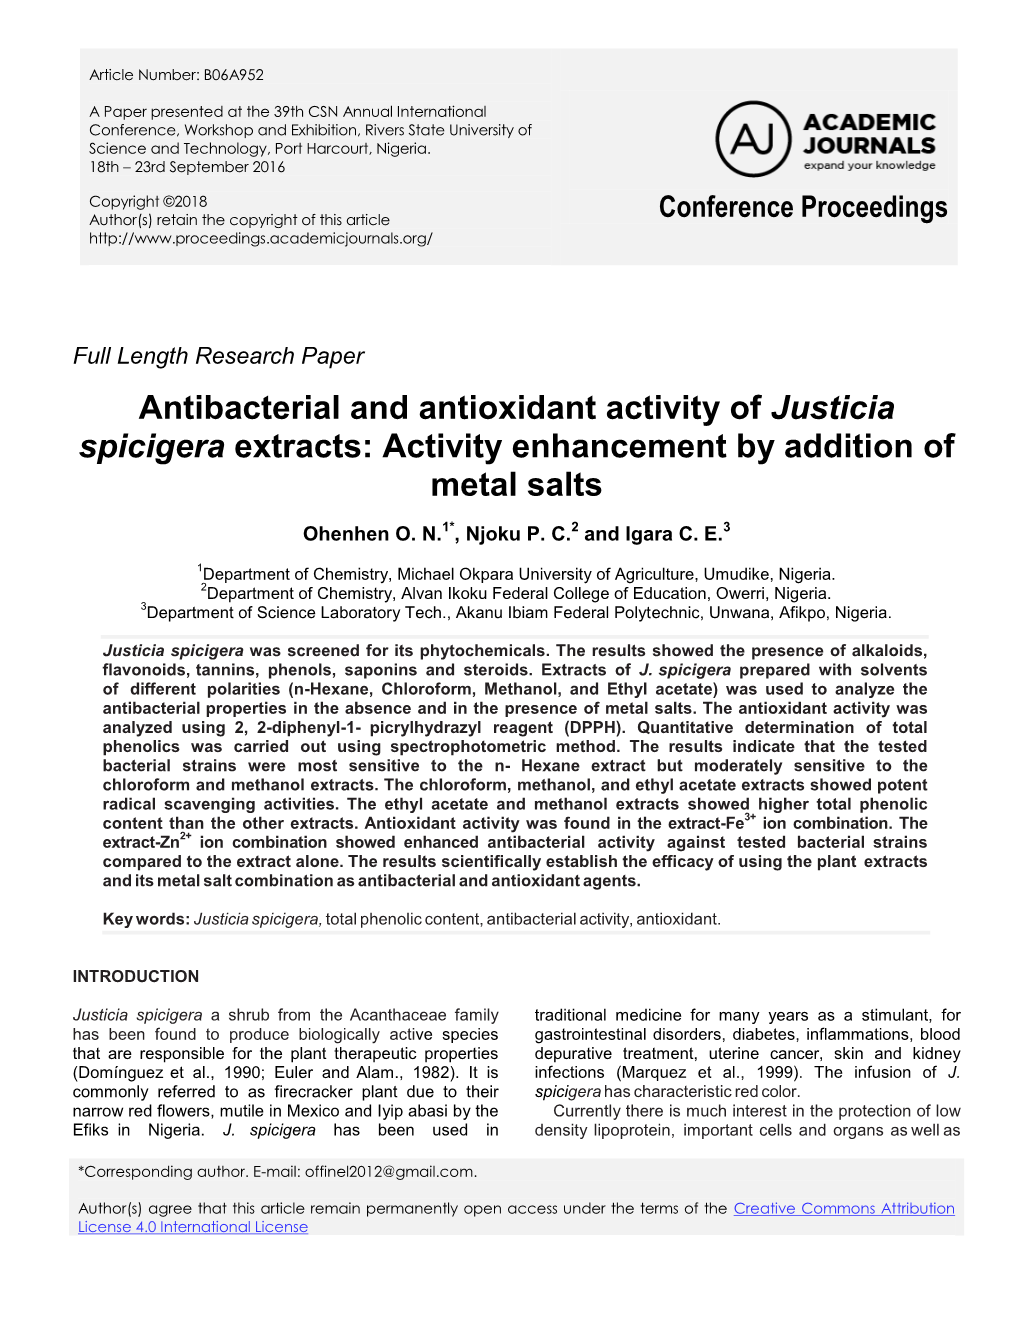 Antibacterial and Antioxidant Activity of Justicia Spicigera Extracts: Activity Enhancement by Addition of Metal Salts